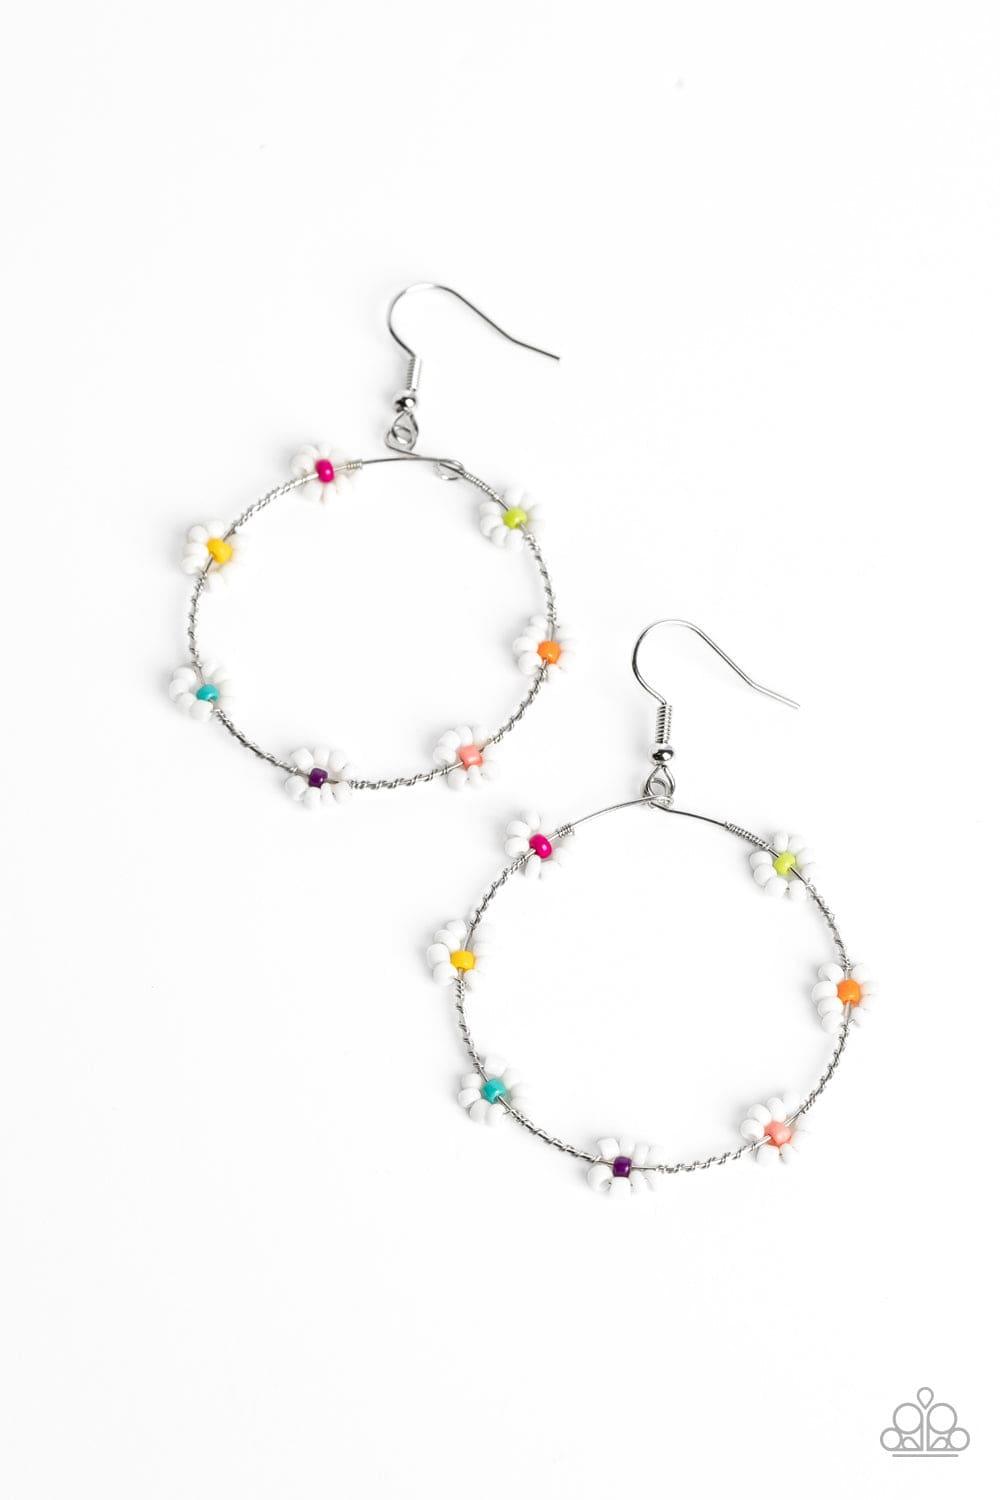 Paparazzi Accessories - Dainty Daisies - Multicolor Earrings - Bling by JessieK